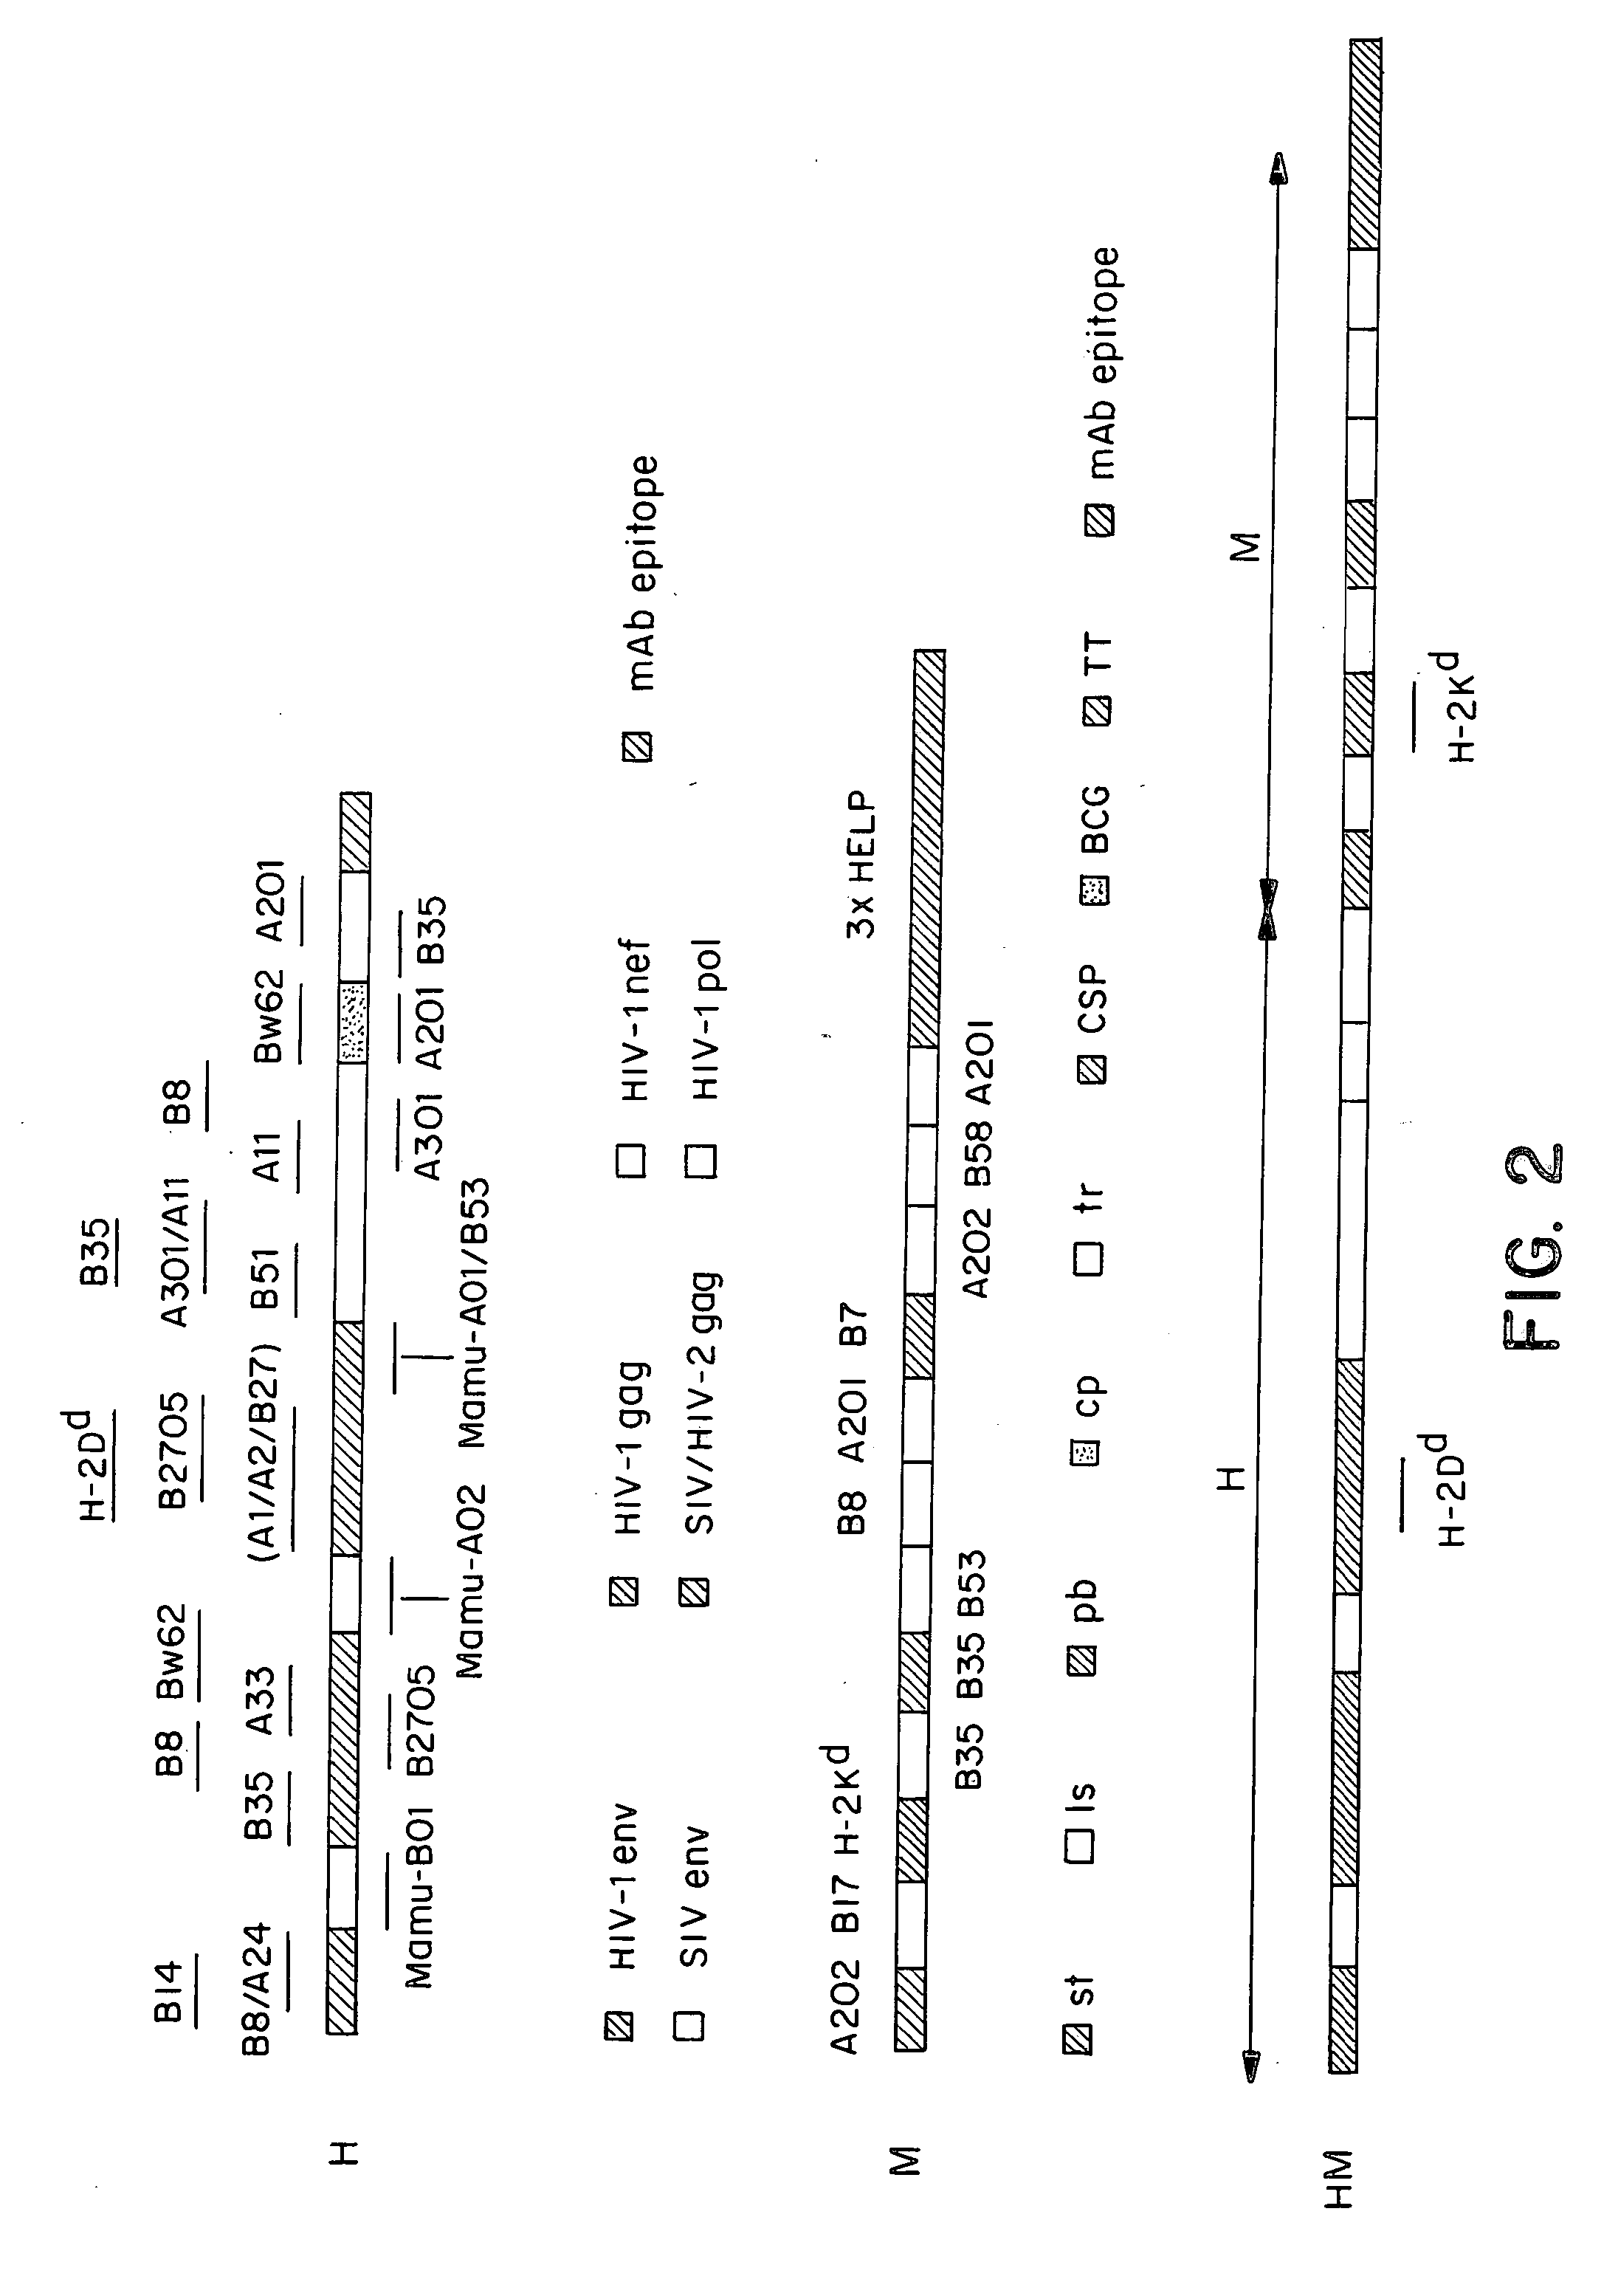 Methods and reagents for vaccination which generate a CD8 T cell immune response